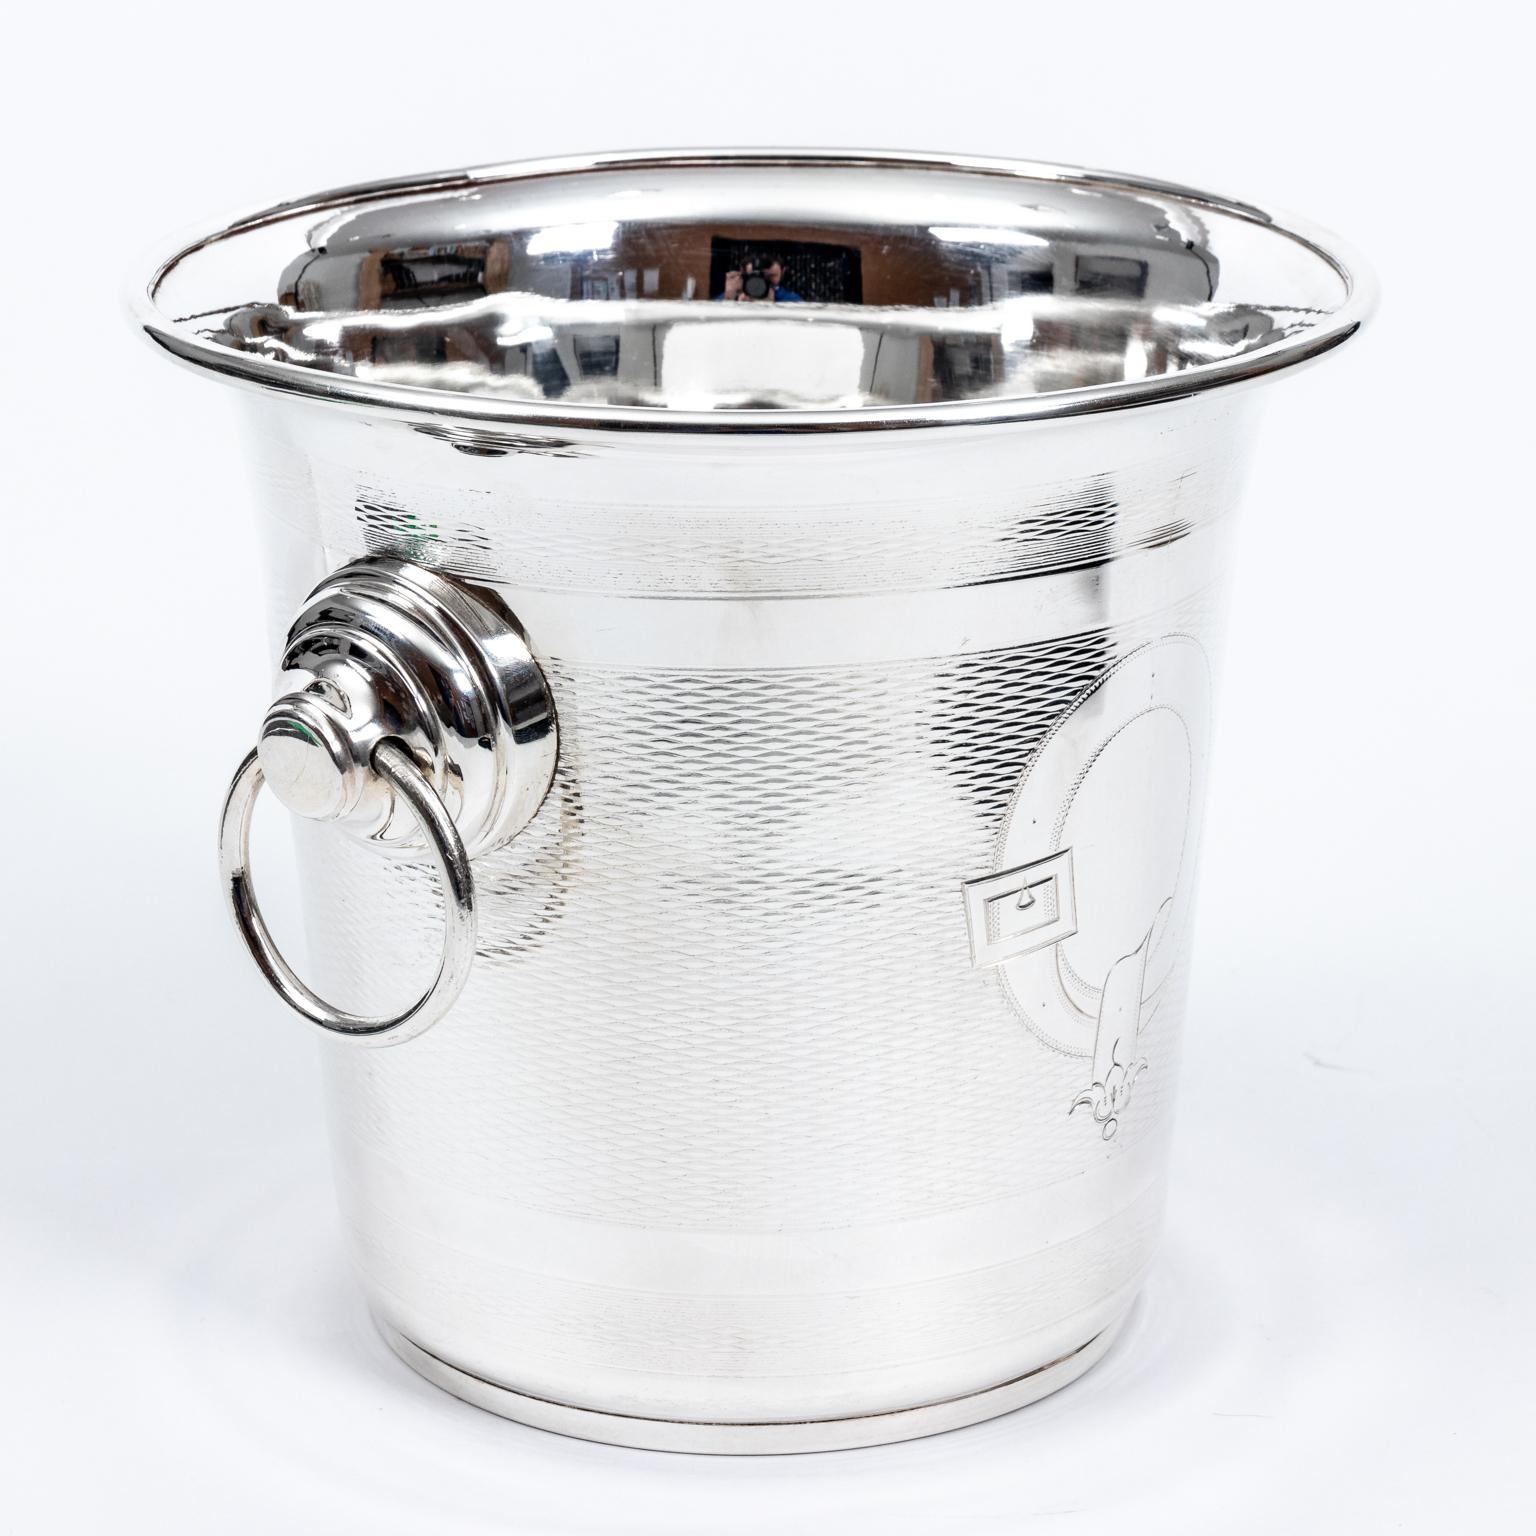 Circa 1930s English ship silver plate champagne bucket or wine cooler with engine turnings and circular handles. Made in England. Please note of wear consistent with age.